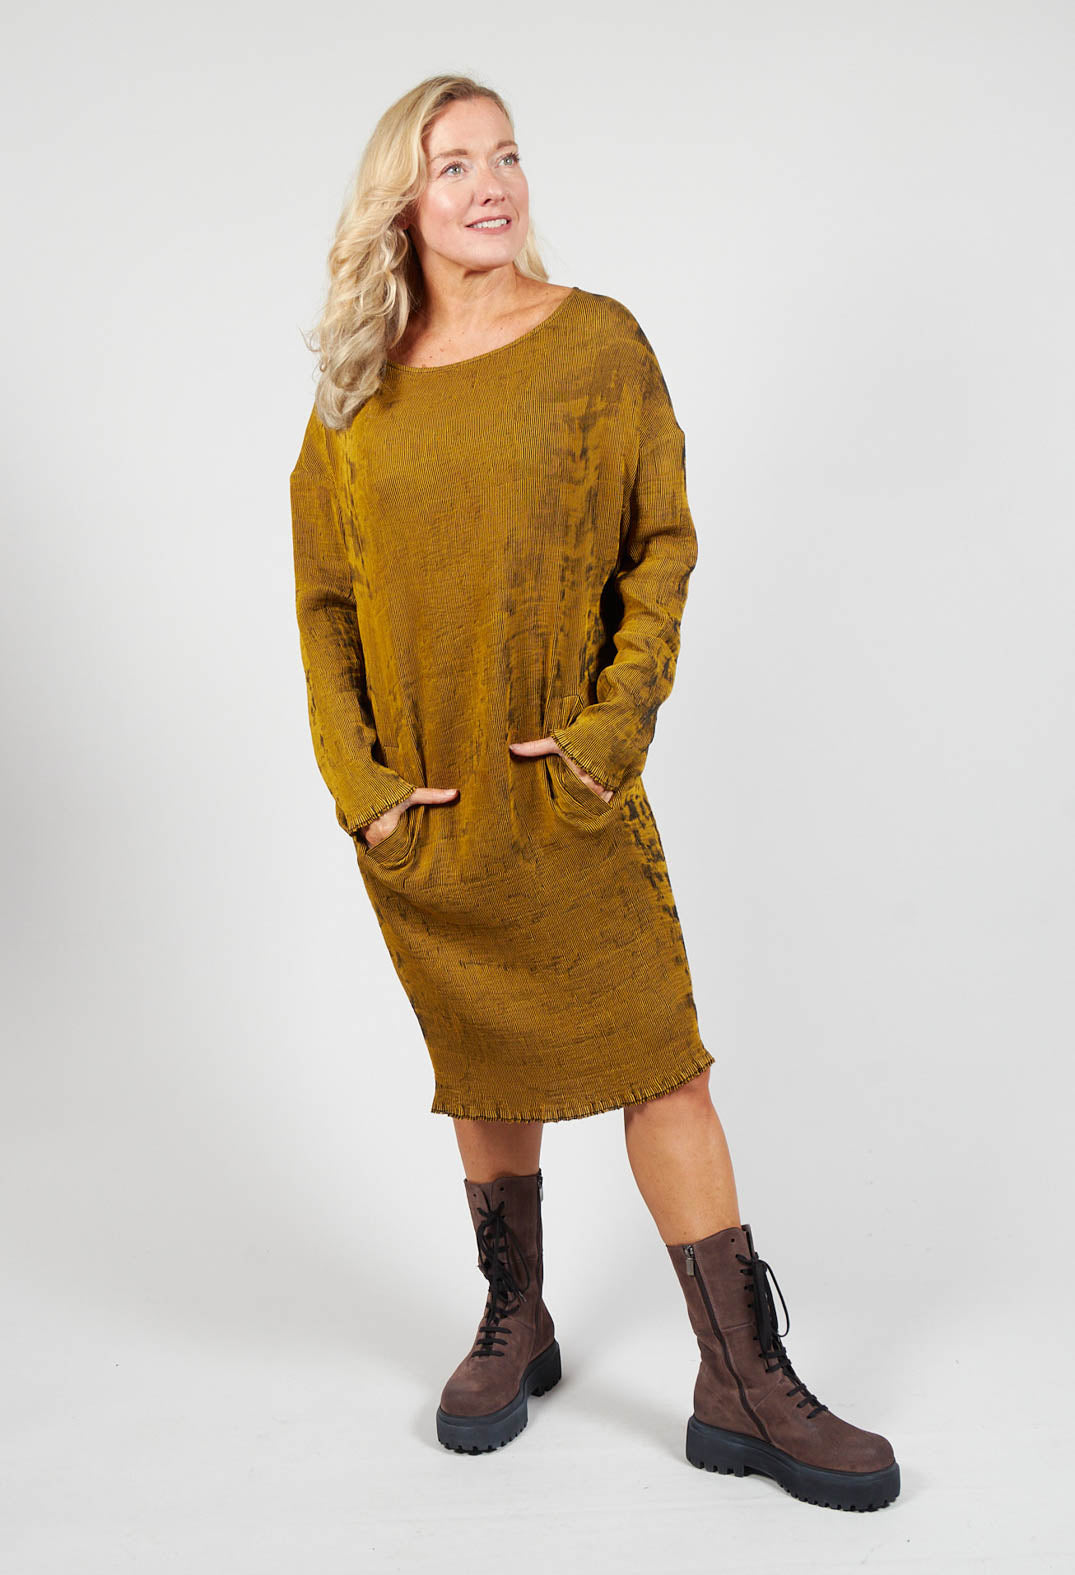 lady smiling wearing a long mustard dress with pockets and chunky boots